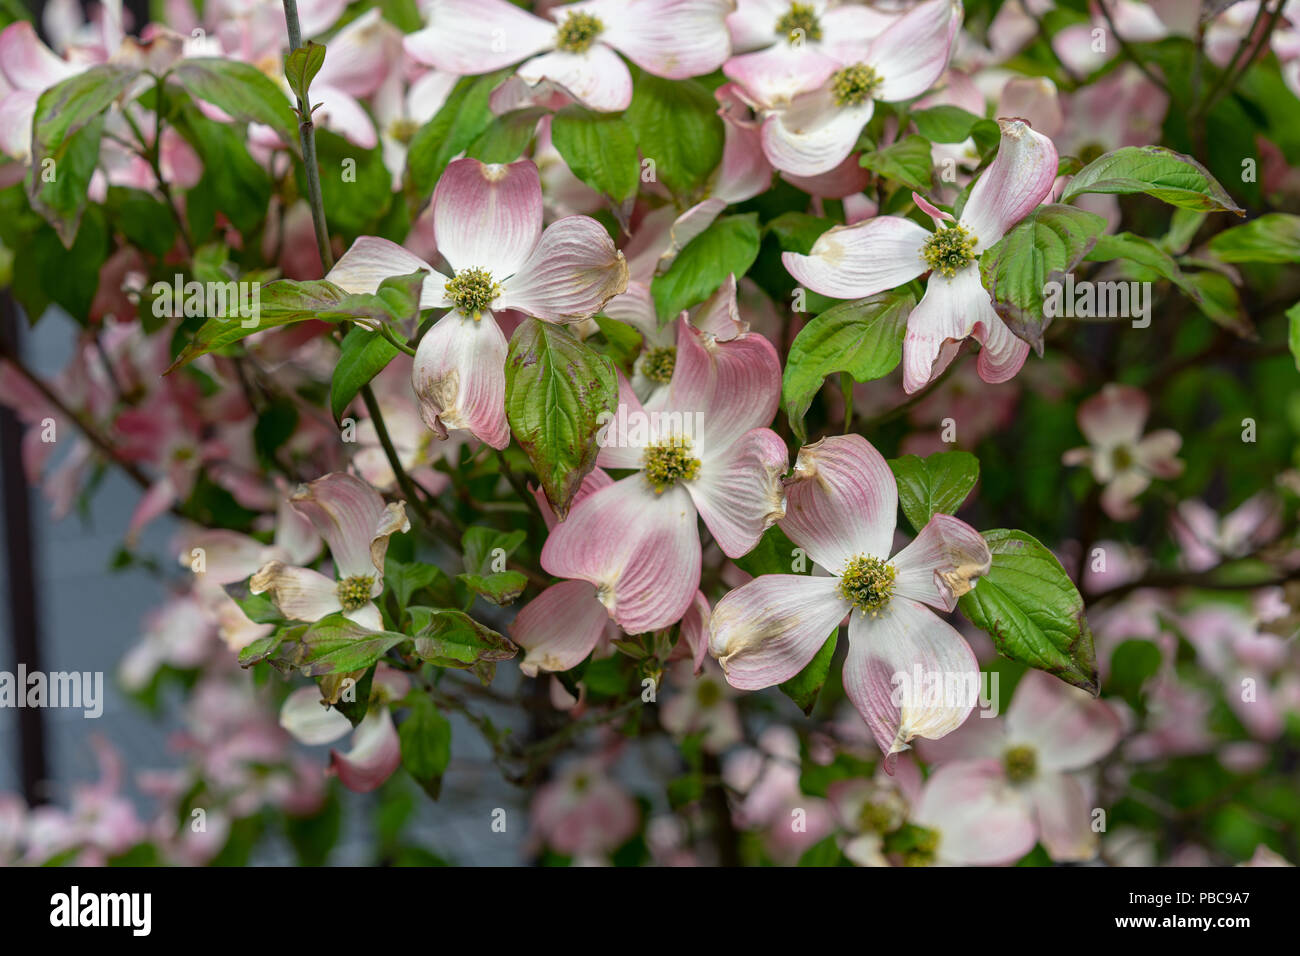 A close-up view of pink dogwood flowers, Cornus florida rubra from north america Stock Photo